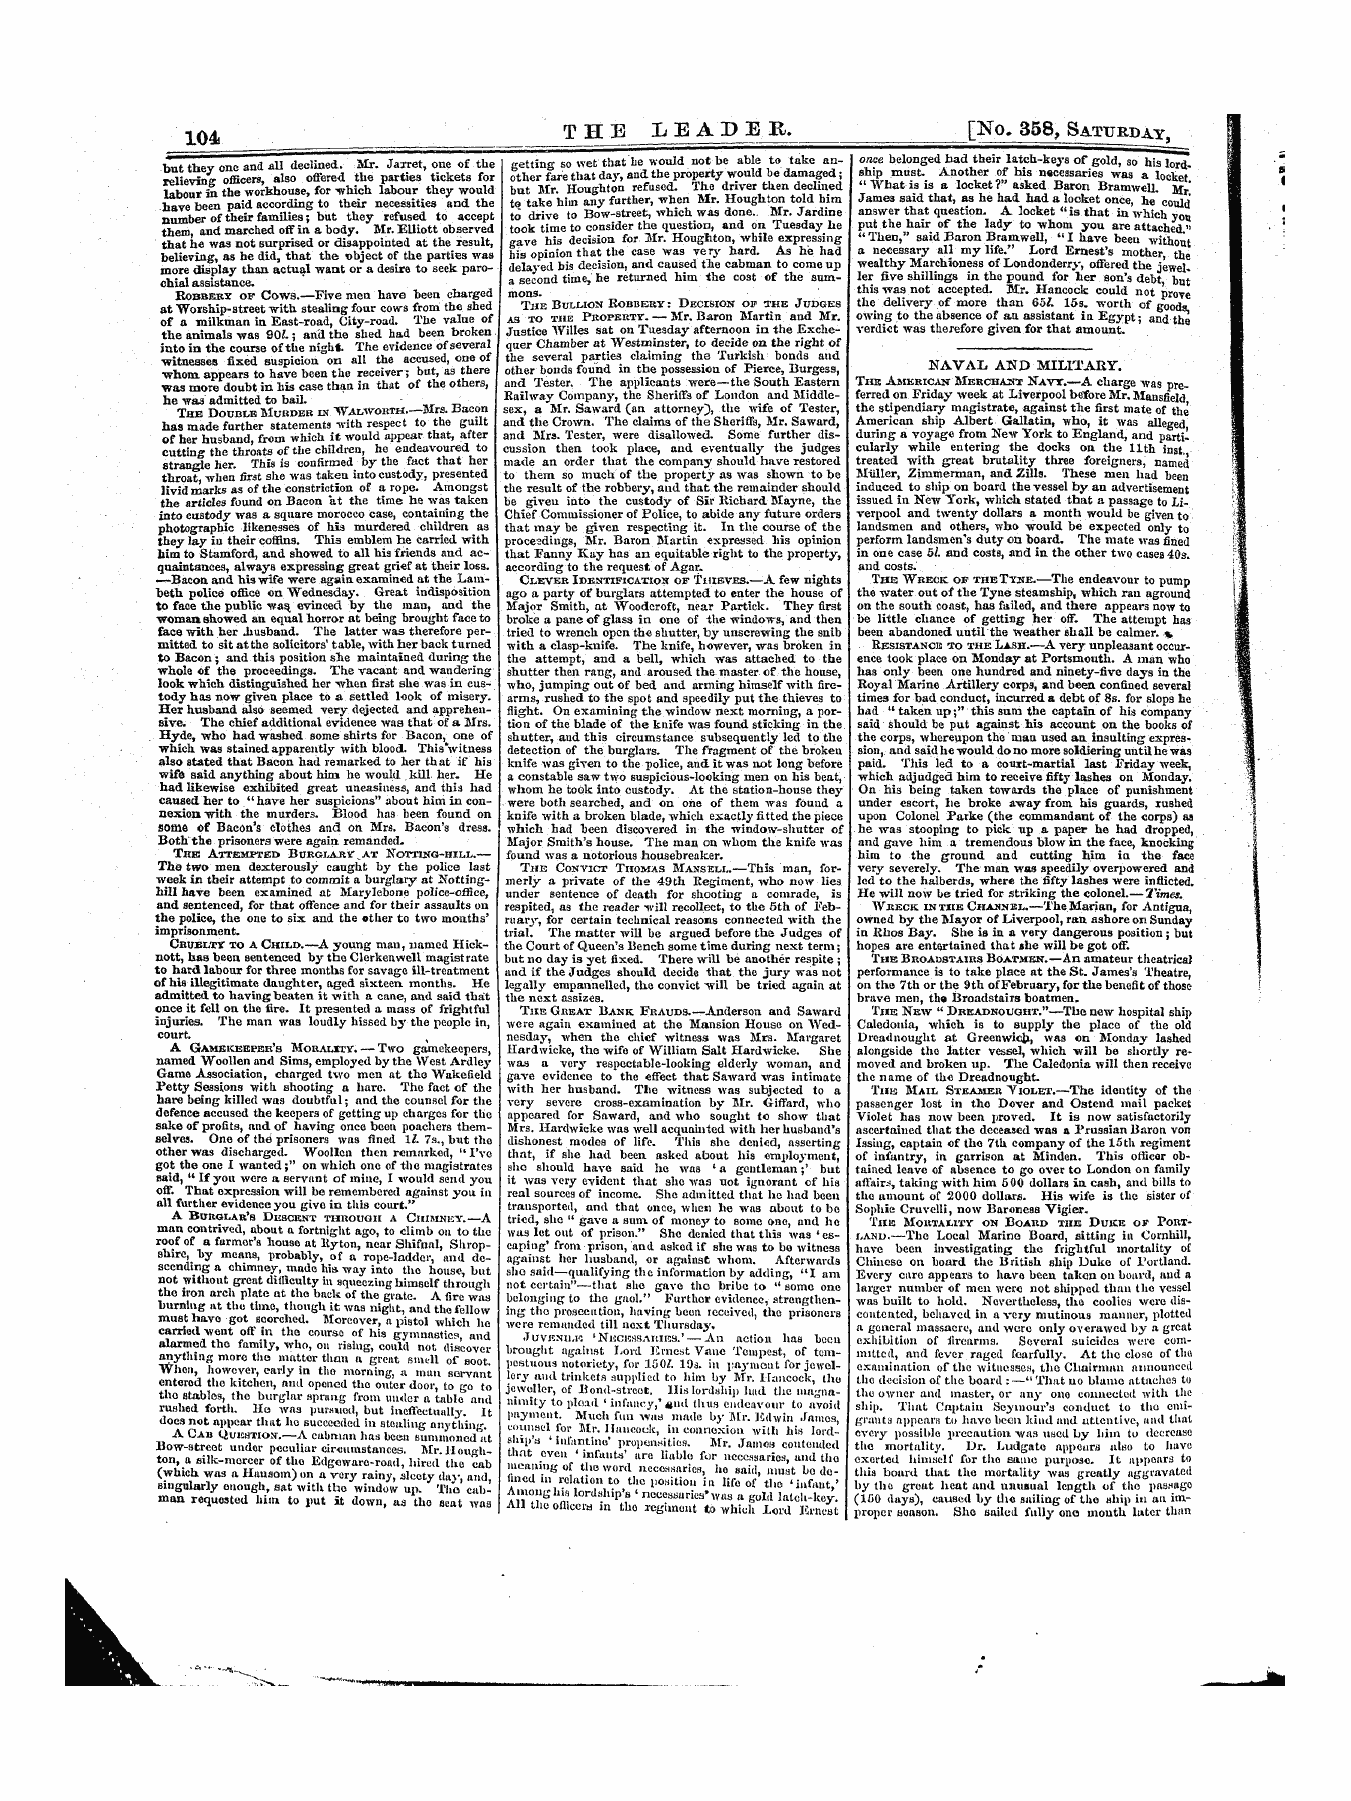 Leader (1850-1860): jS F Y, 1st edition: 8